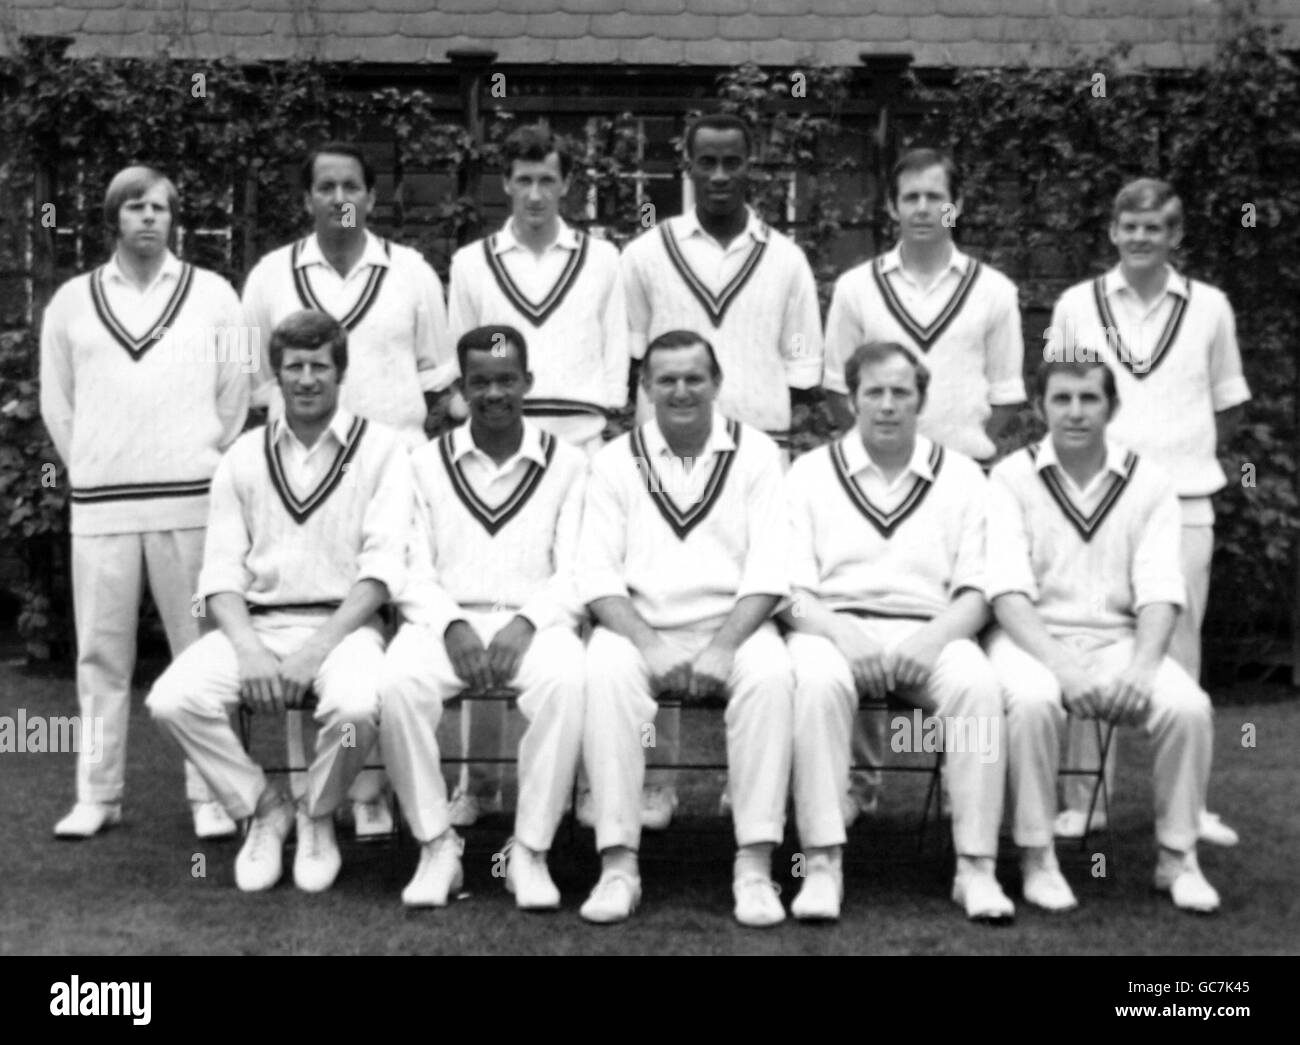 Cricket - Worcestershire Cricket Club. Worcestershire Team Group maggio 1970 Foto Stock